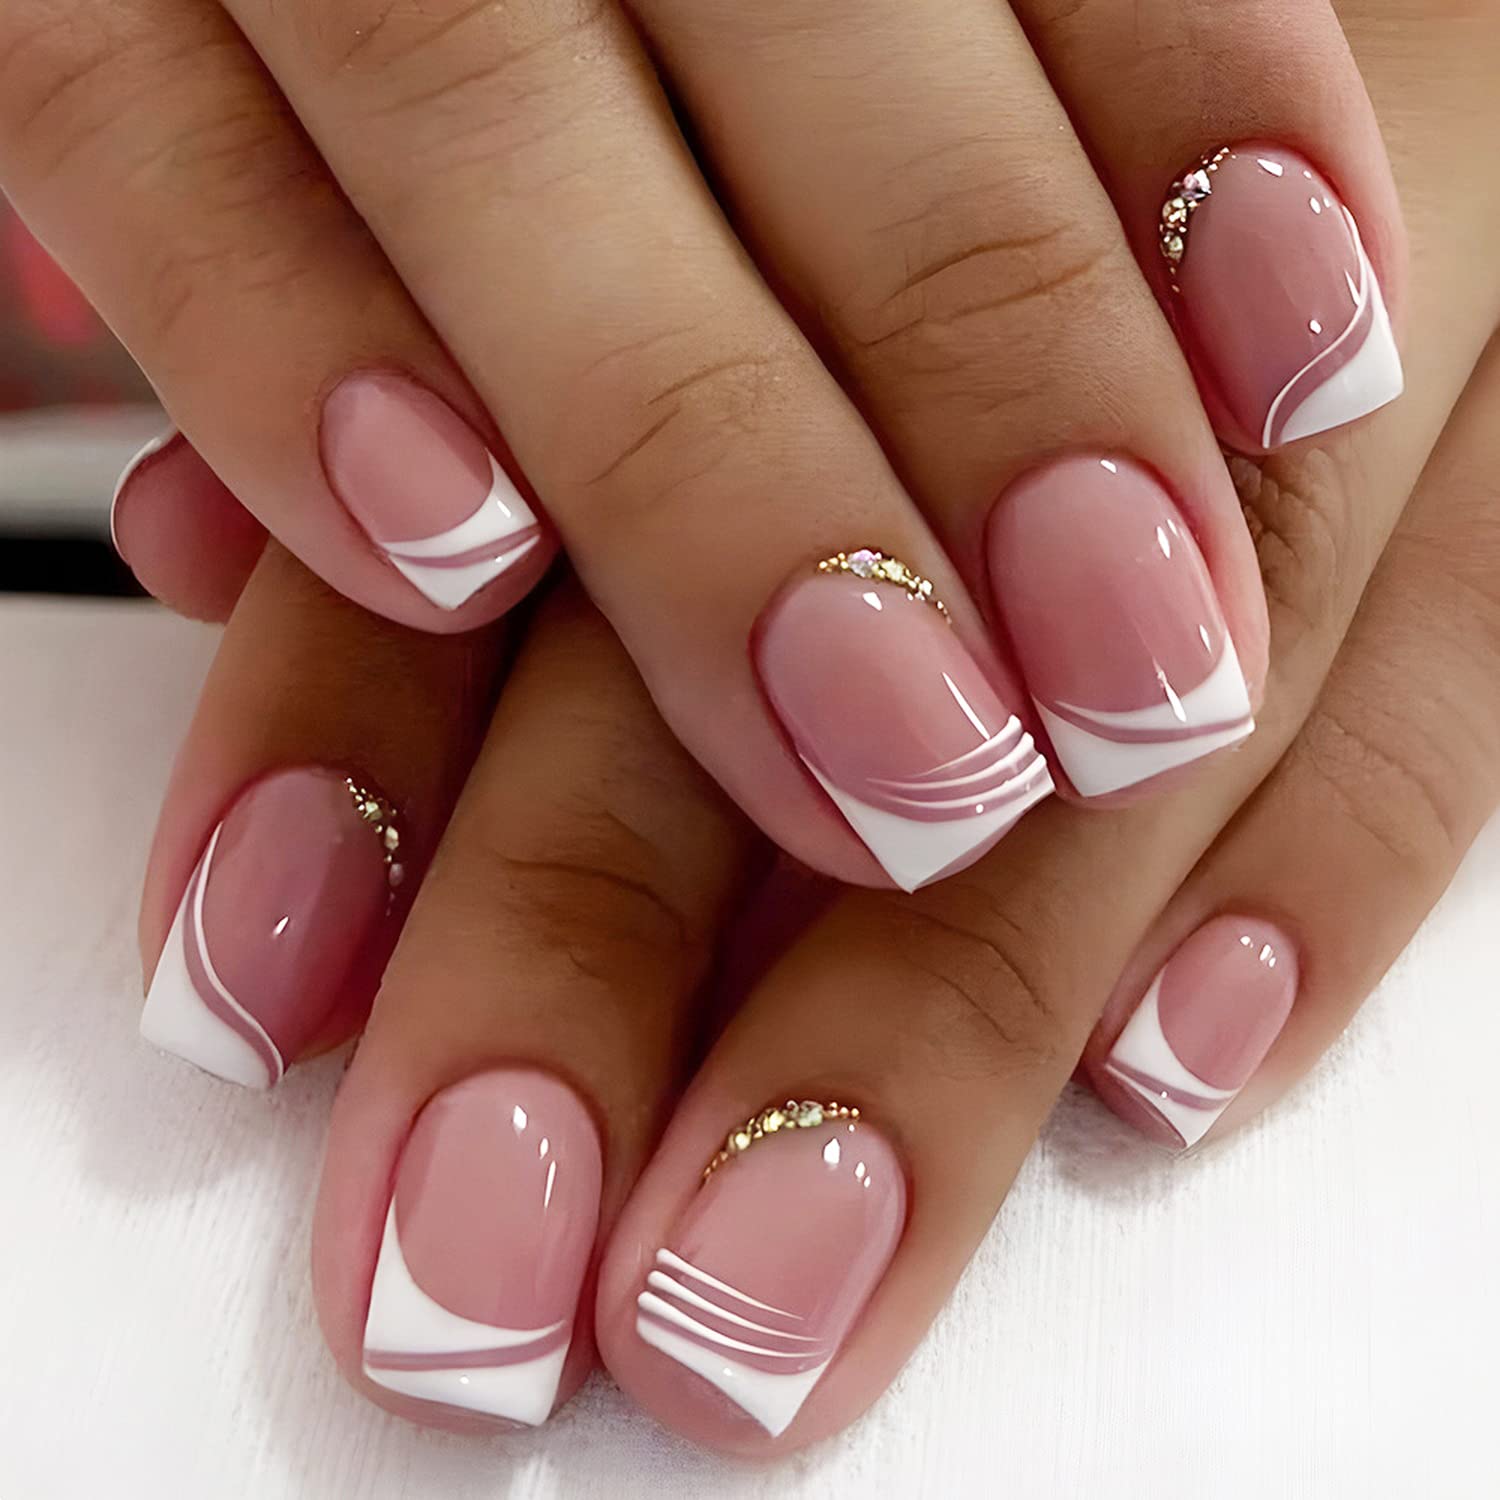 Mesmerizing Short French Manicure Ideas to Dress Your Tips For Fall